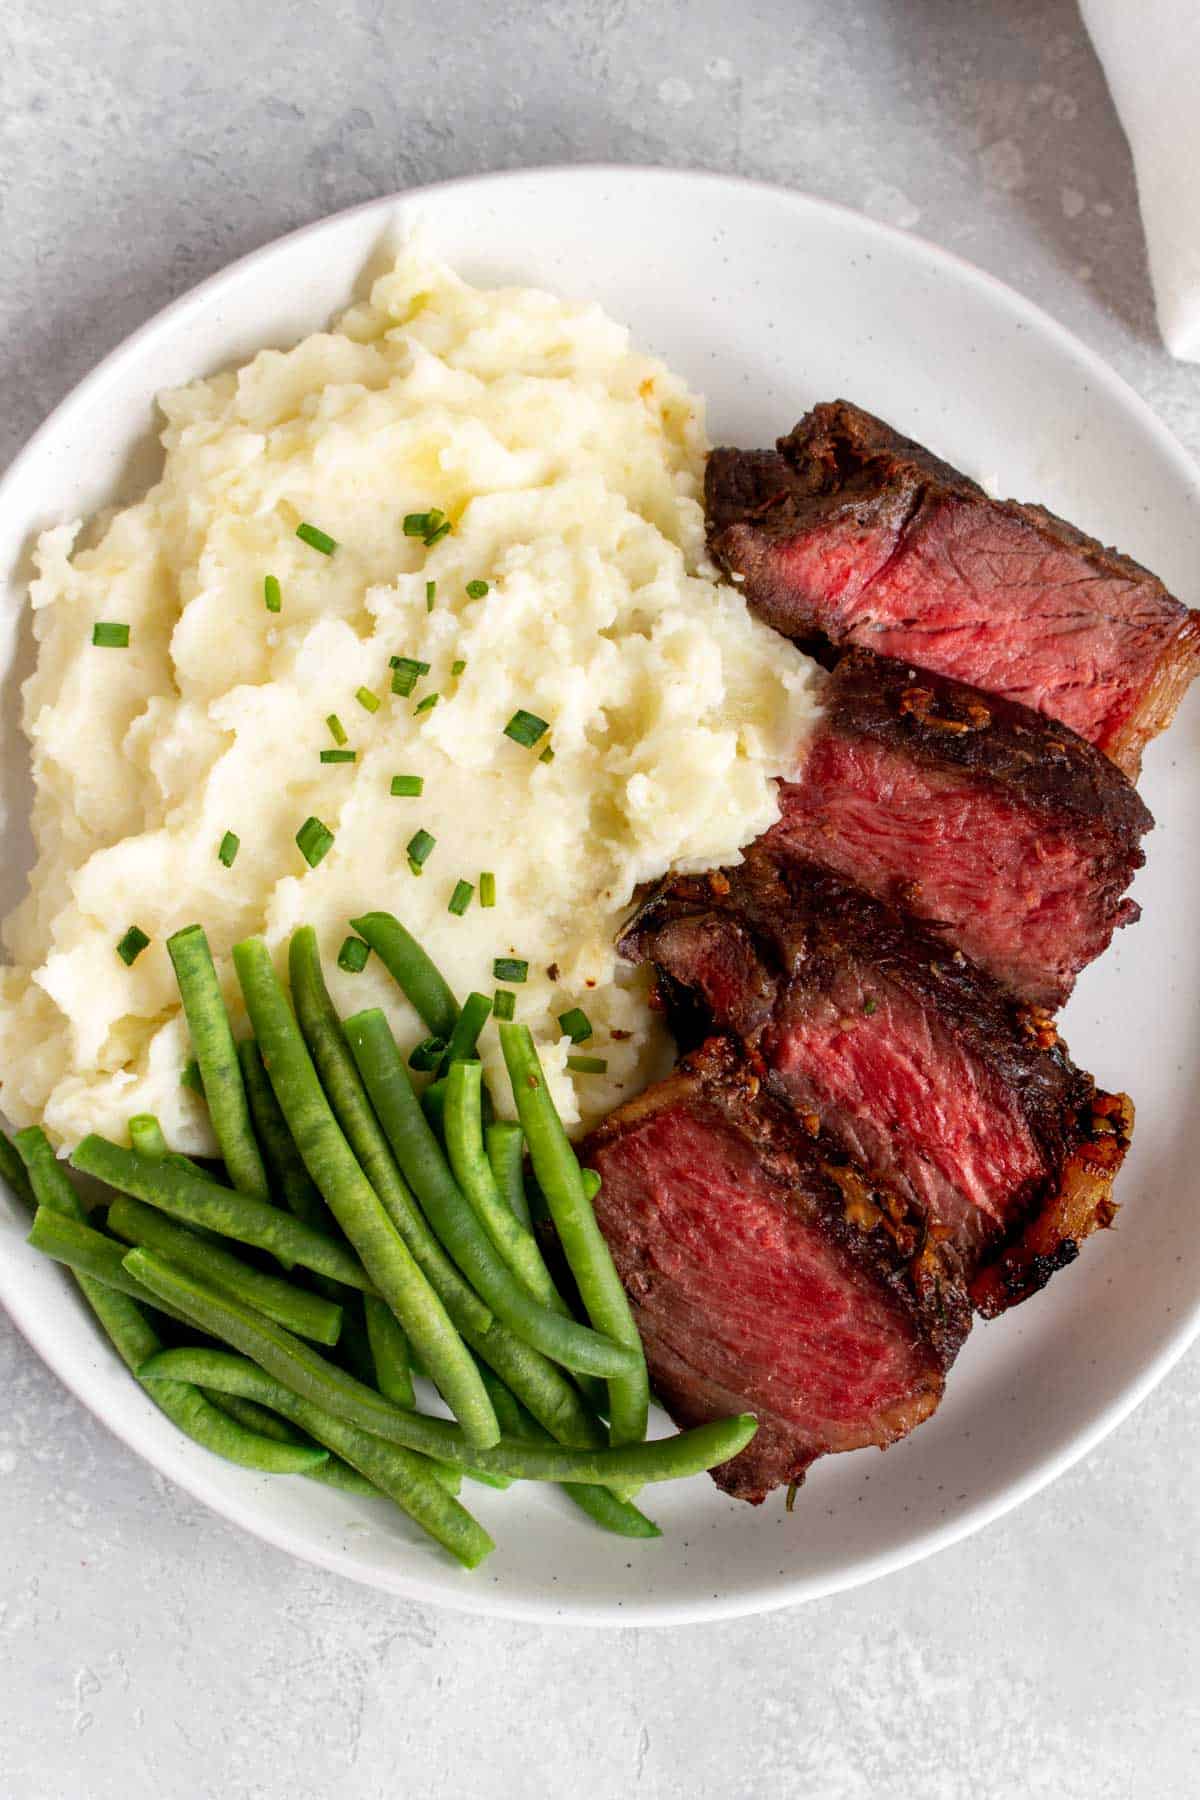 A plate with mashed potatoes, green beans, and sliced steak.